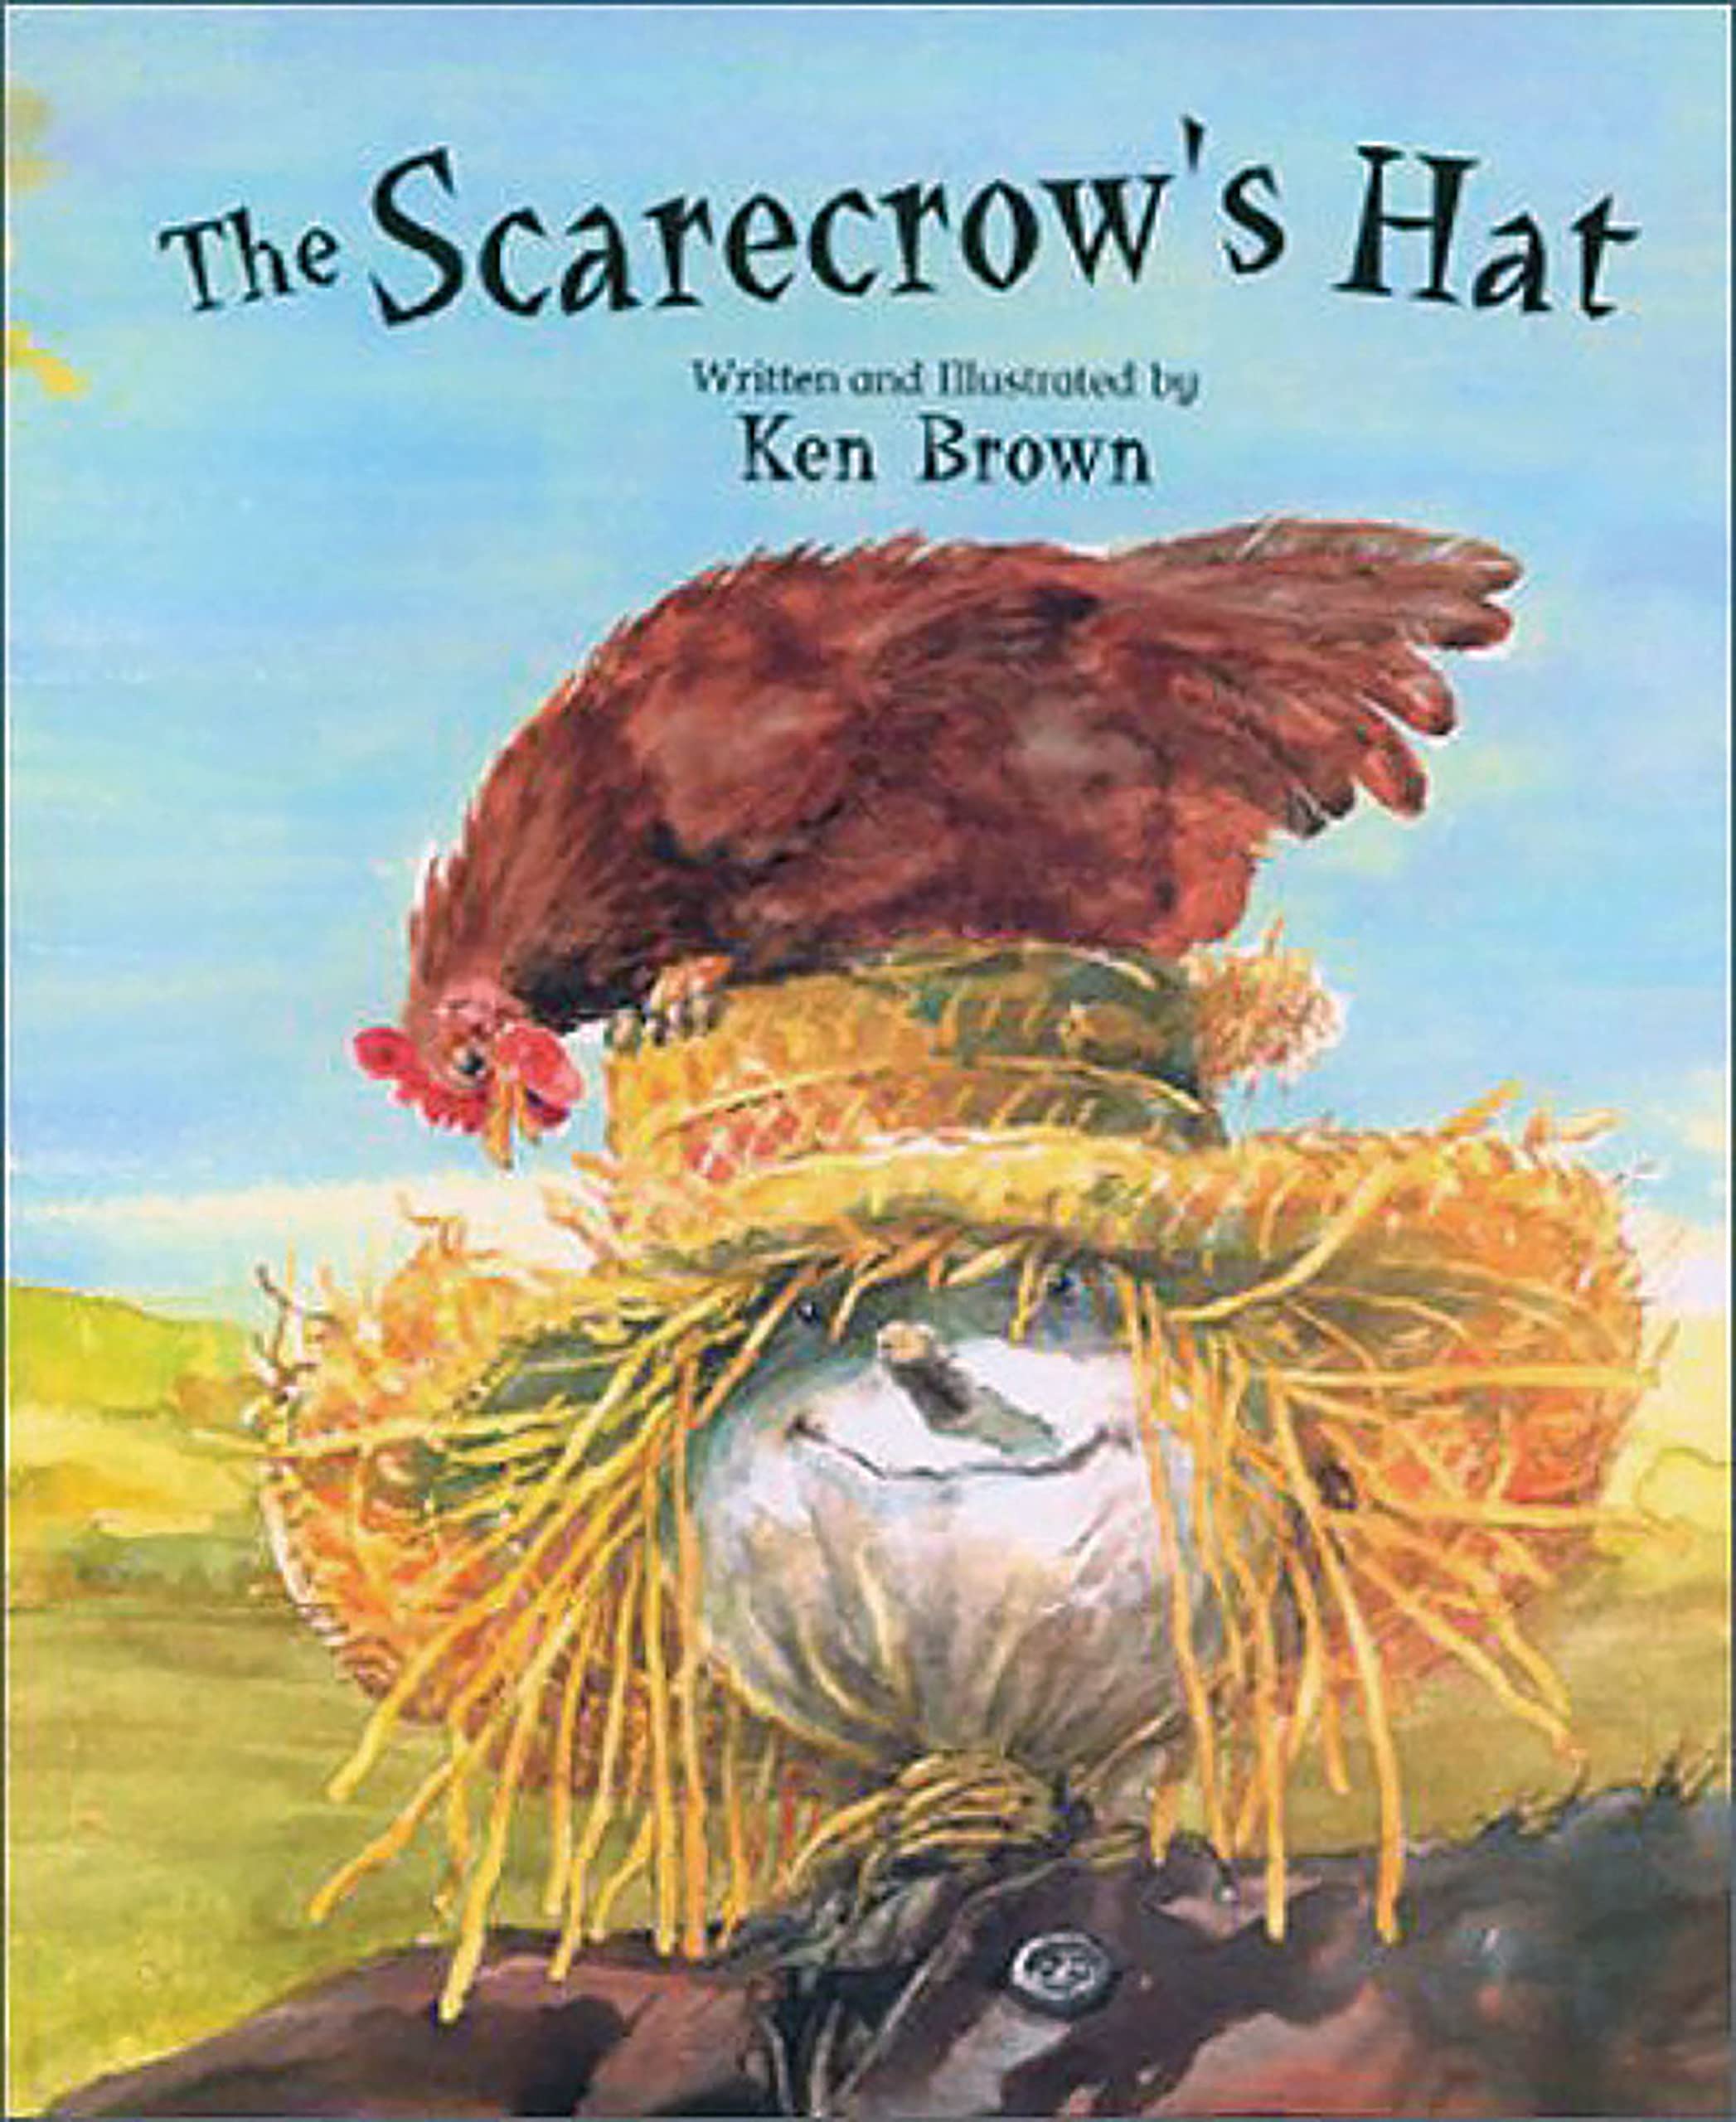 speech and language teaching concepts for The Scarecrow's Hat in speech therapy​ ​